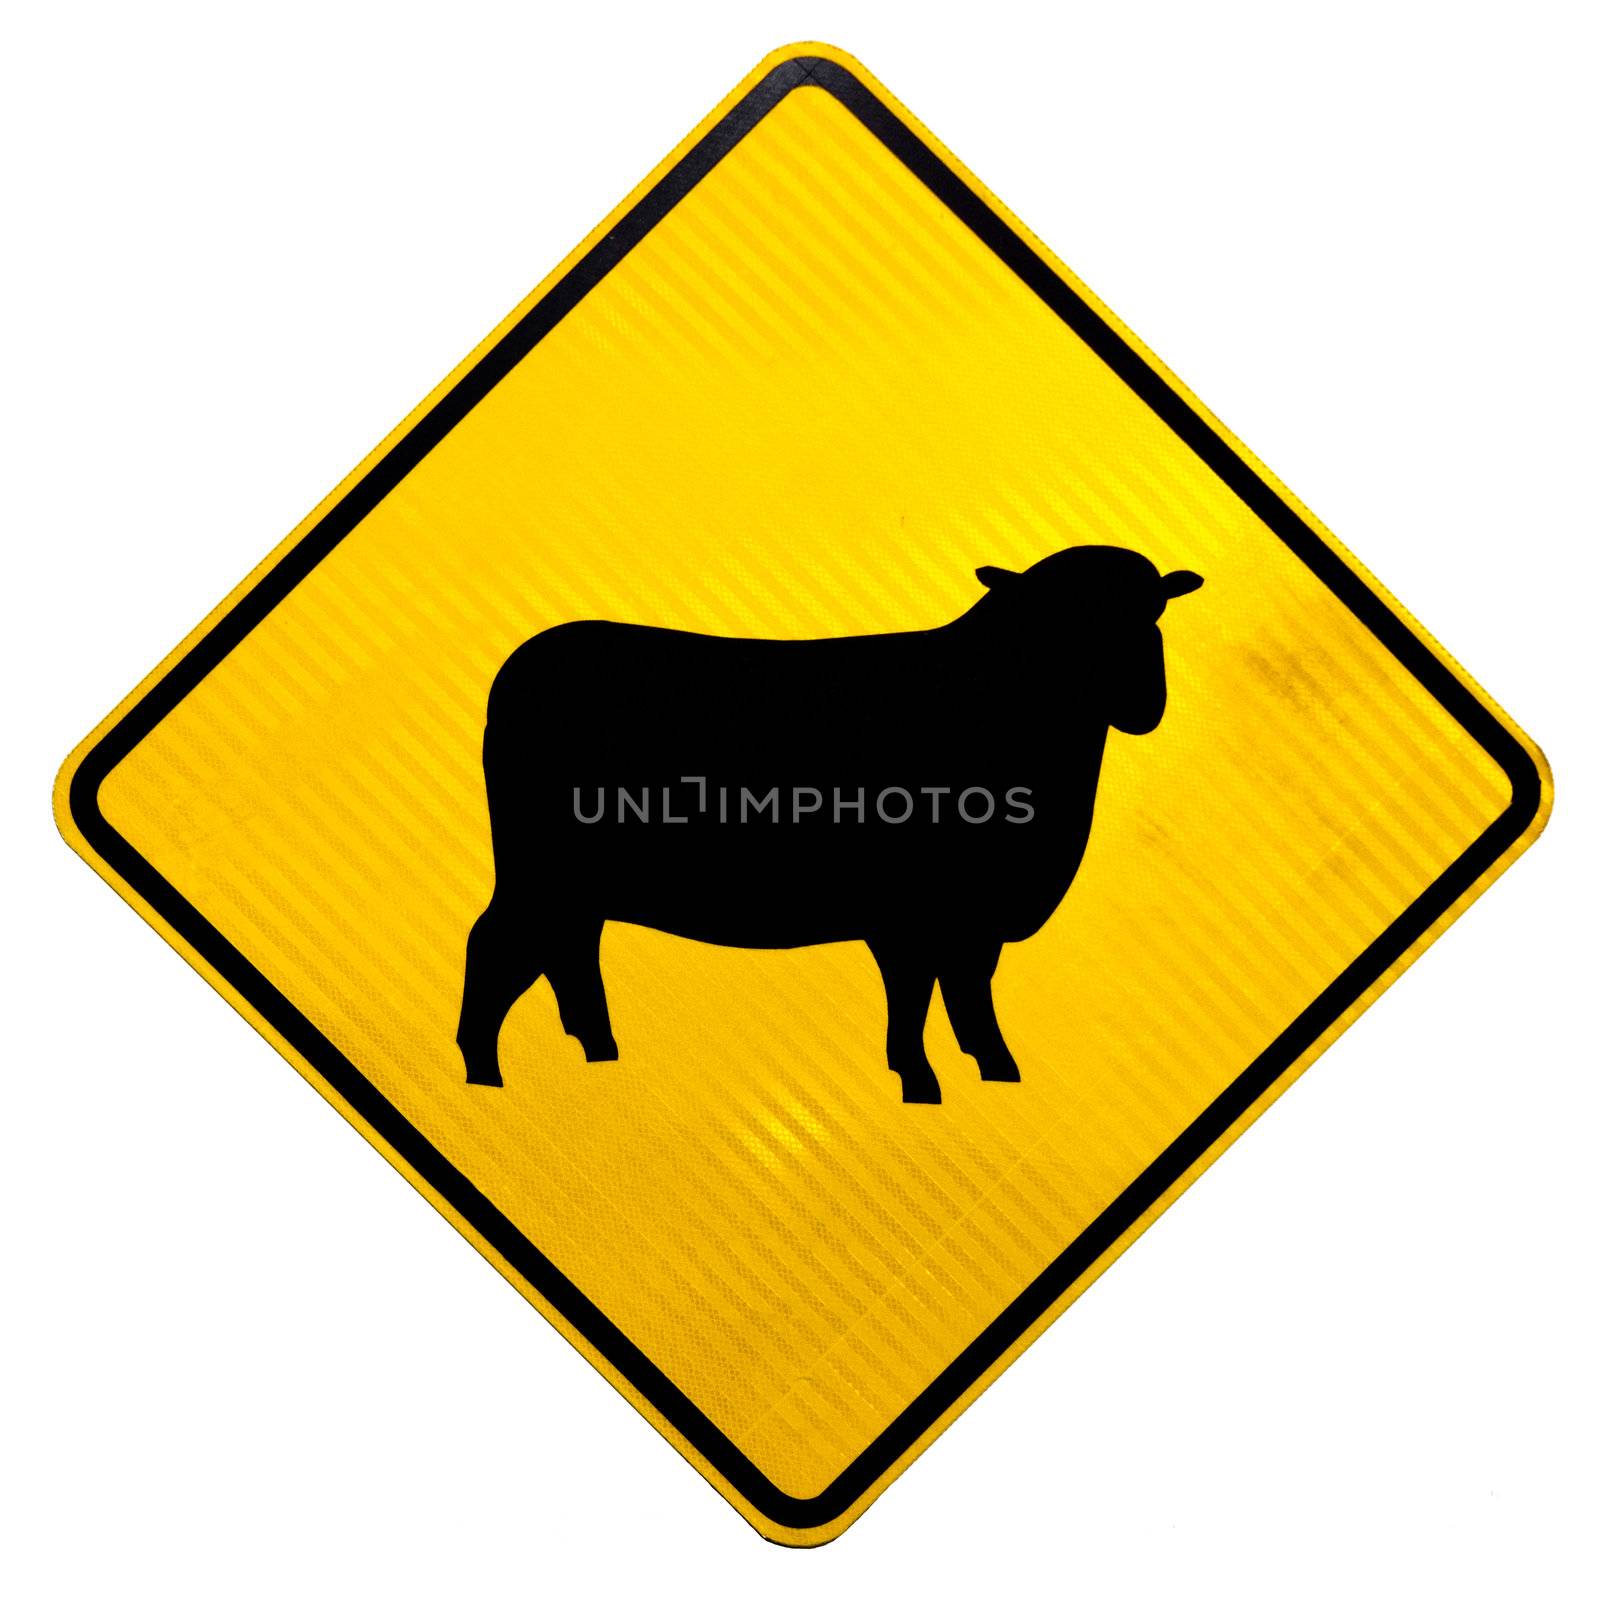 New Zealand Road Sign, Attention Sheep Crossing Road isolated on white background